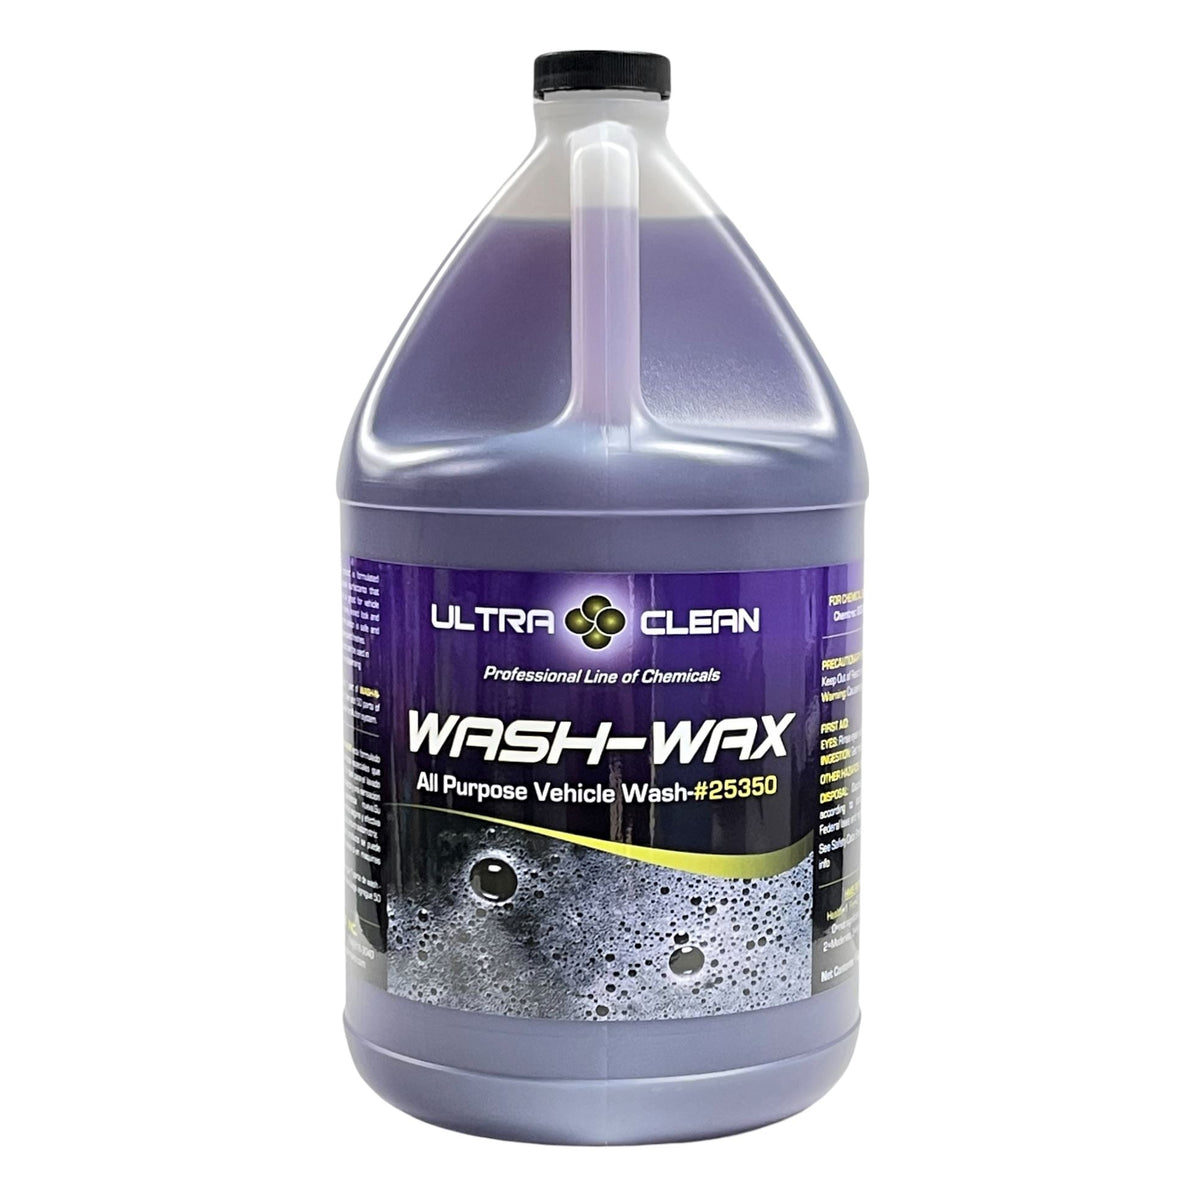 H8eraide Car Wash and Wax 32oz - Patented Technology Provides Deep Cleaning  Car Wash Soap and Wax